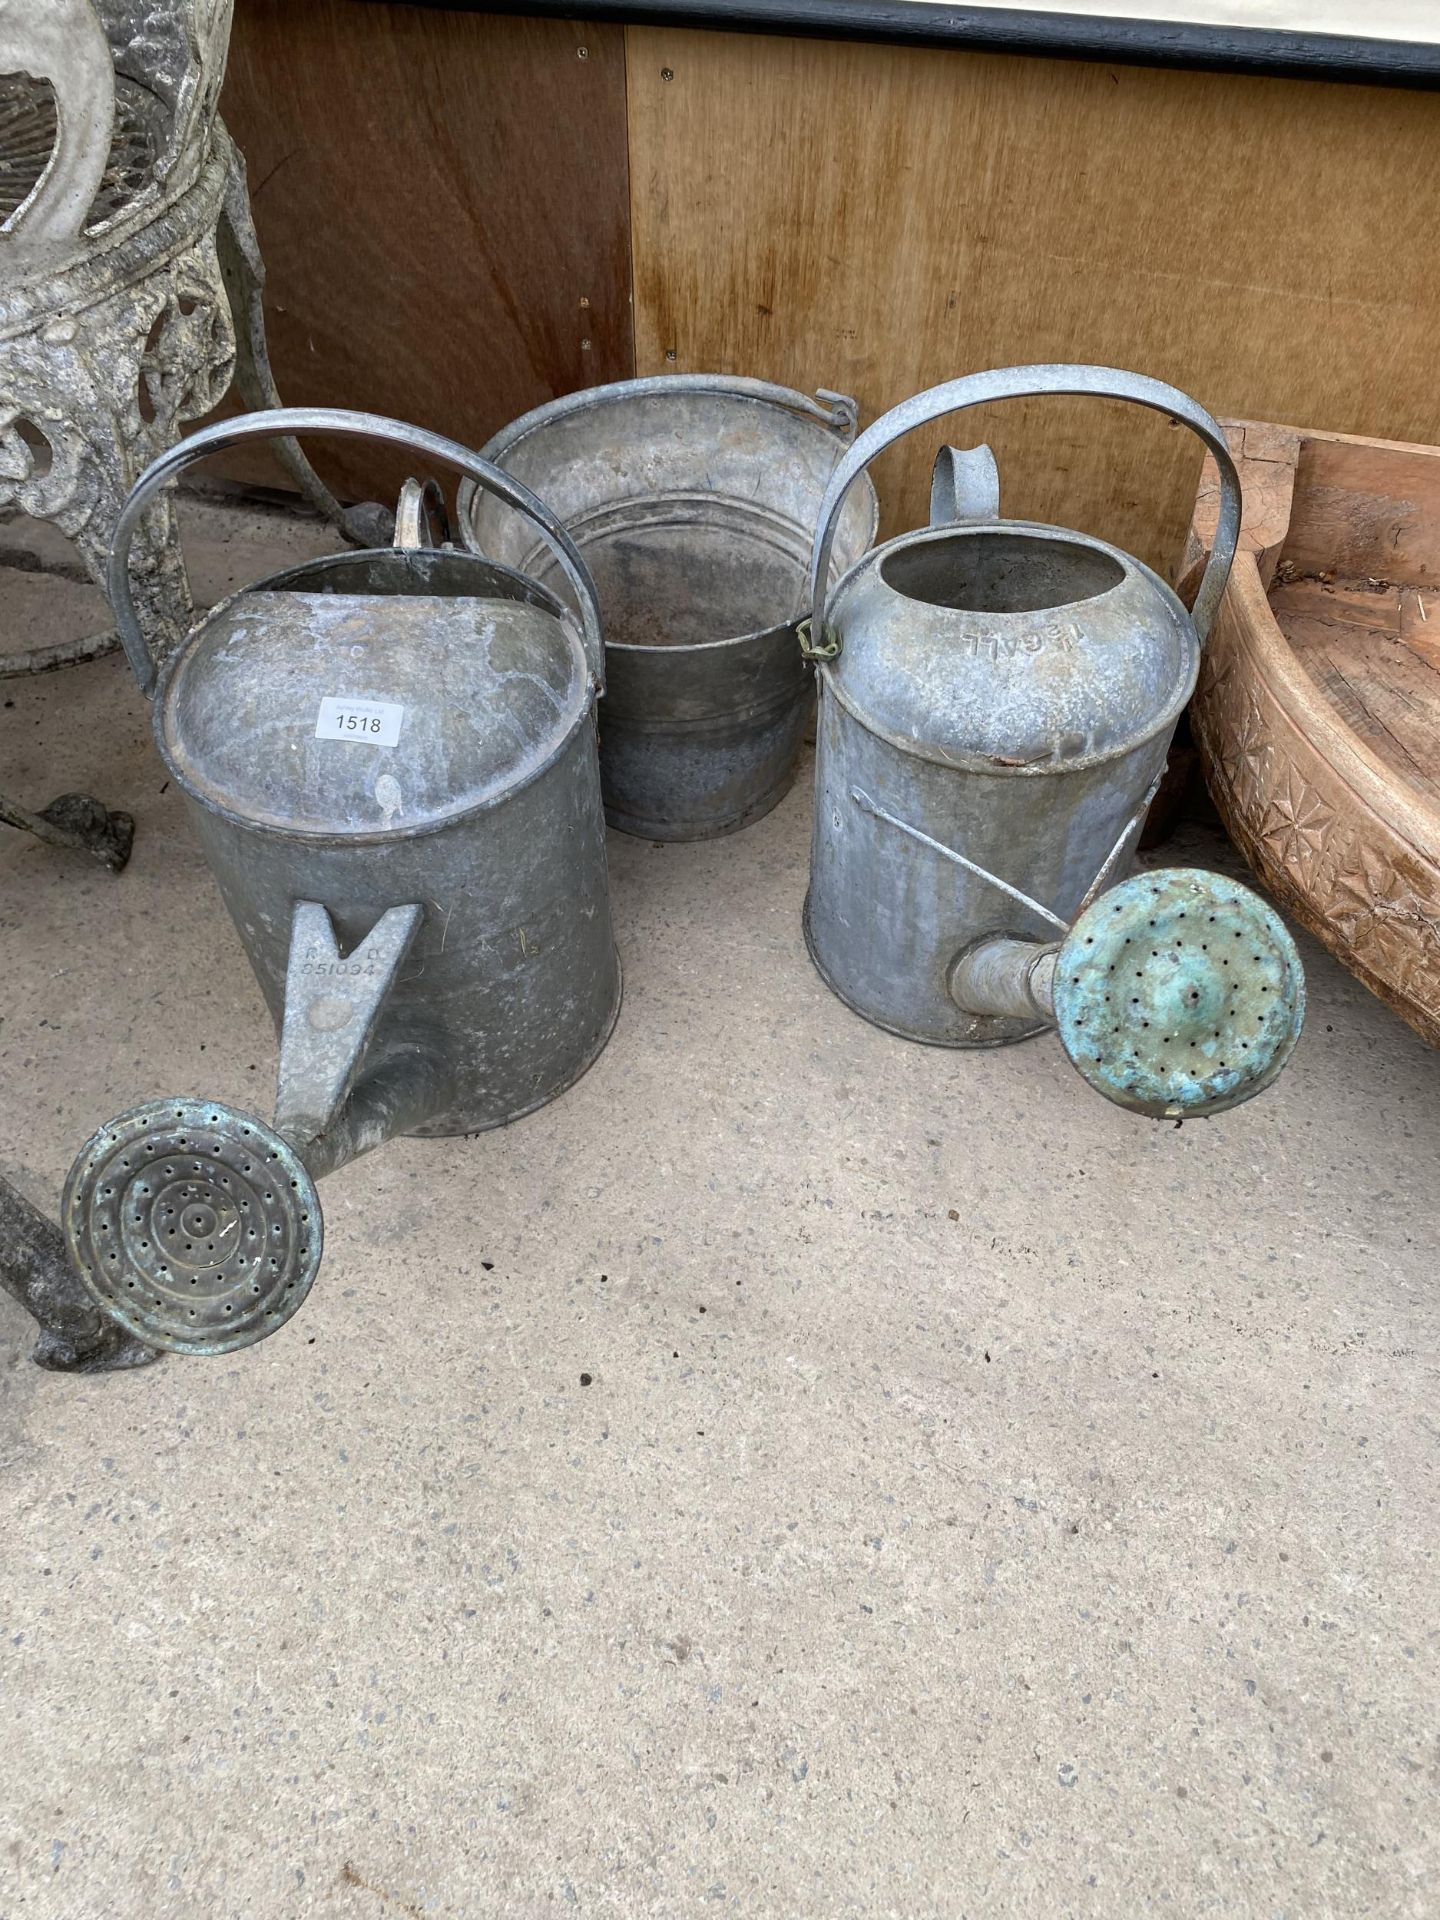 TWO VINTAGE GALVANISED WATERING CANS AND A GALVANISED BUCKET